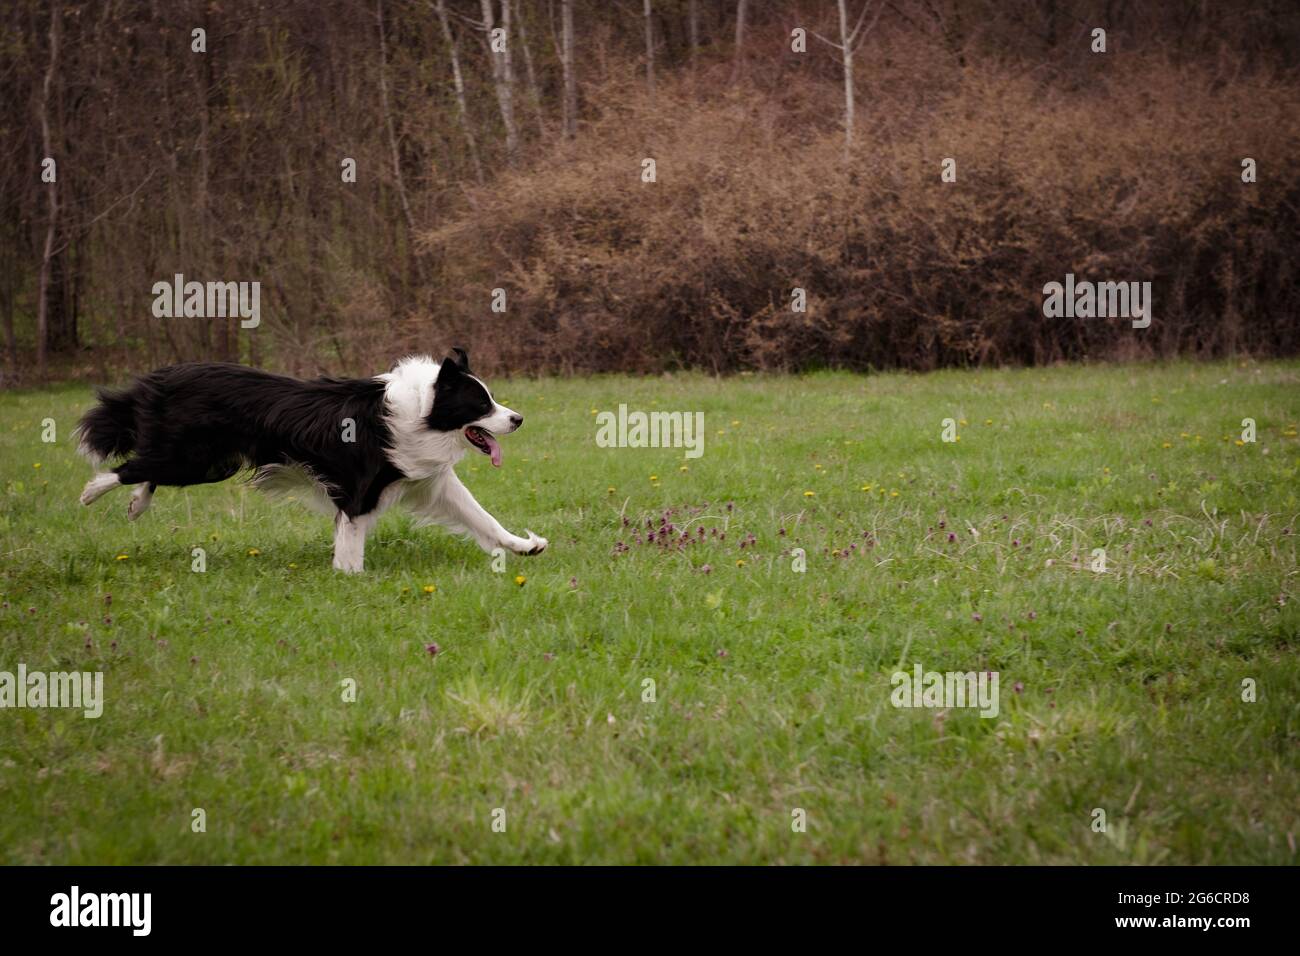 Border Collie running in a forest as seen in Romania Stock Photo - Alamy